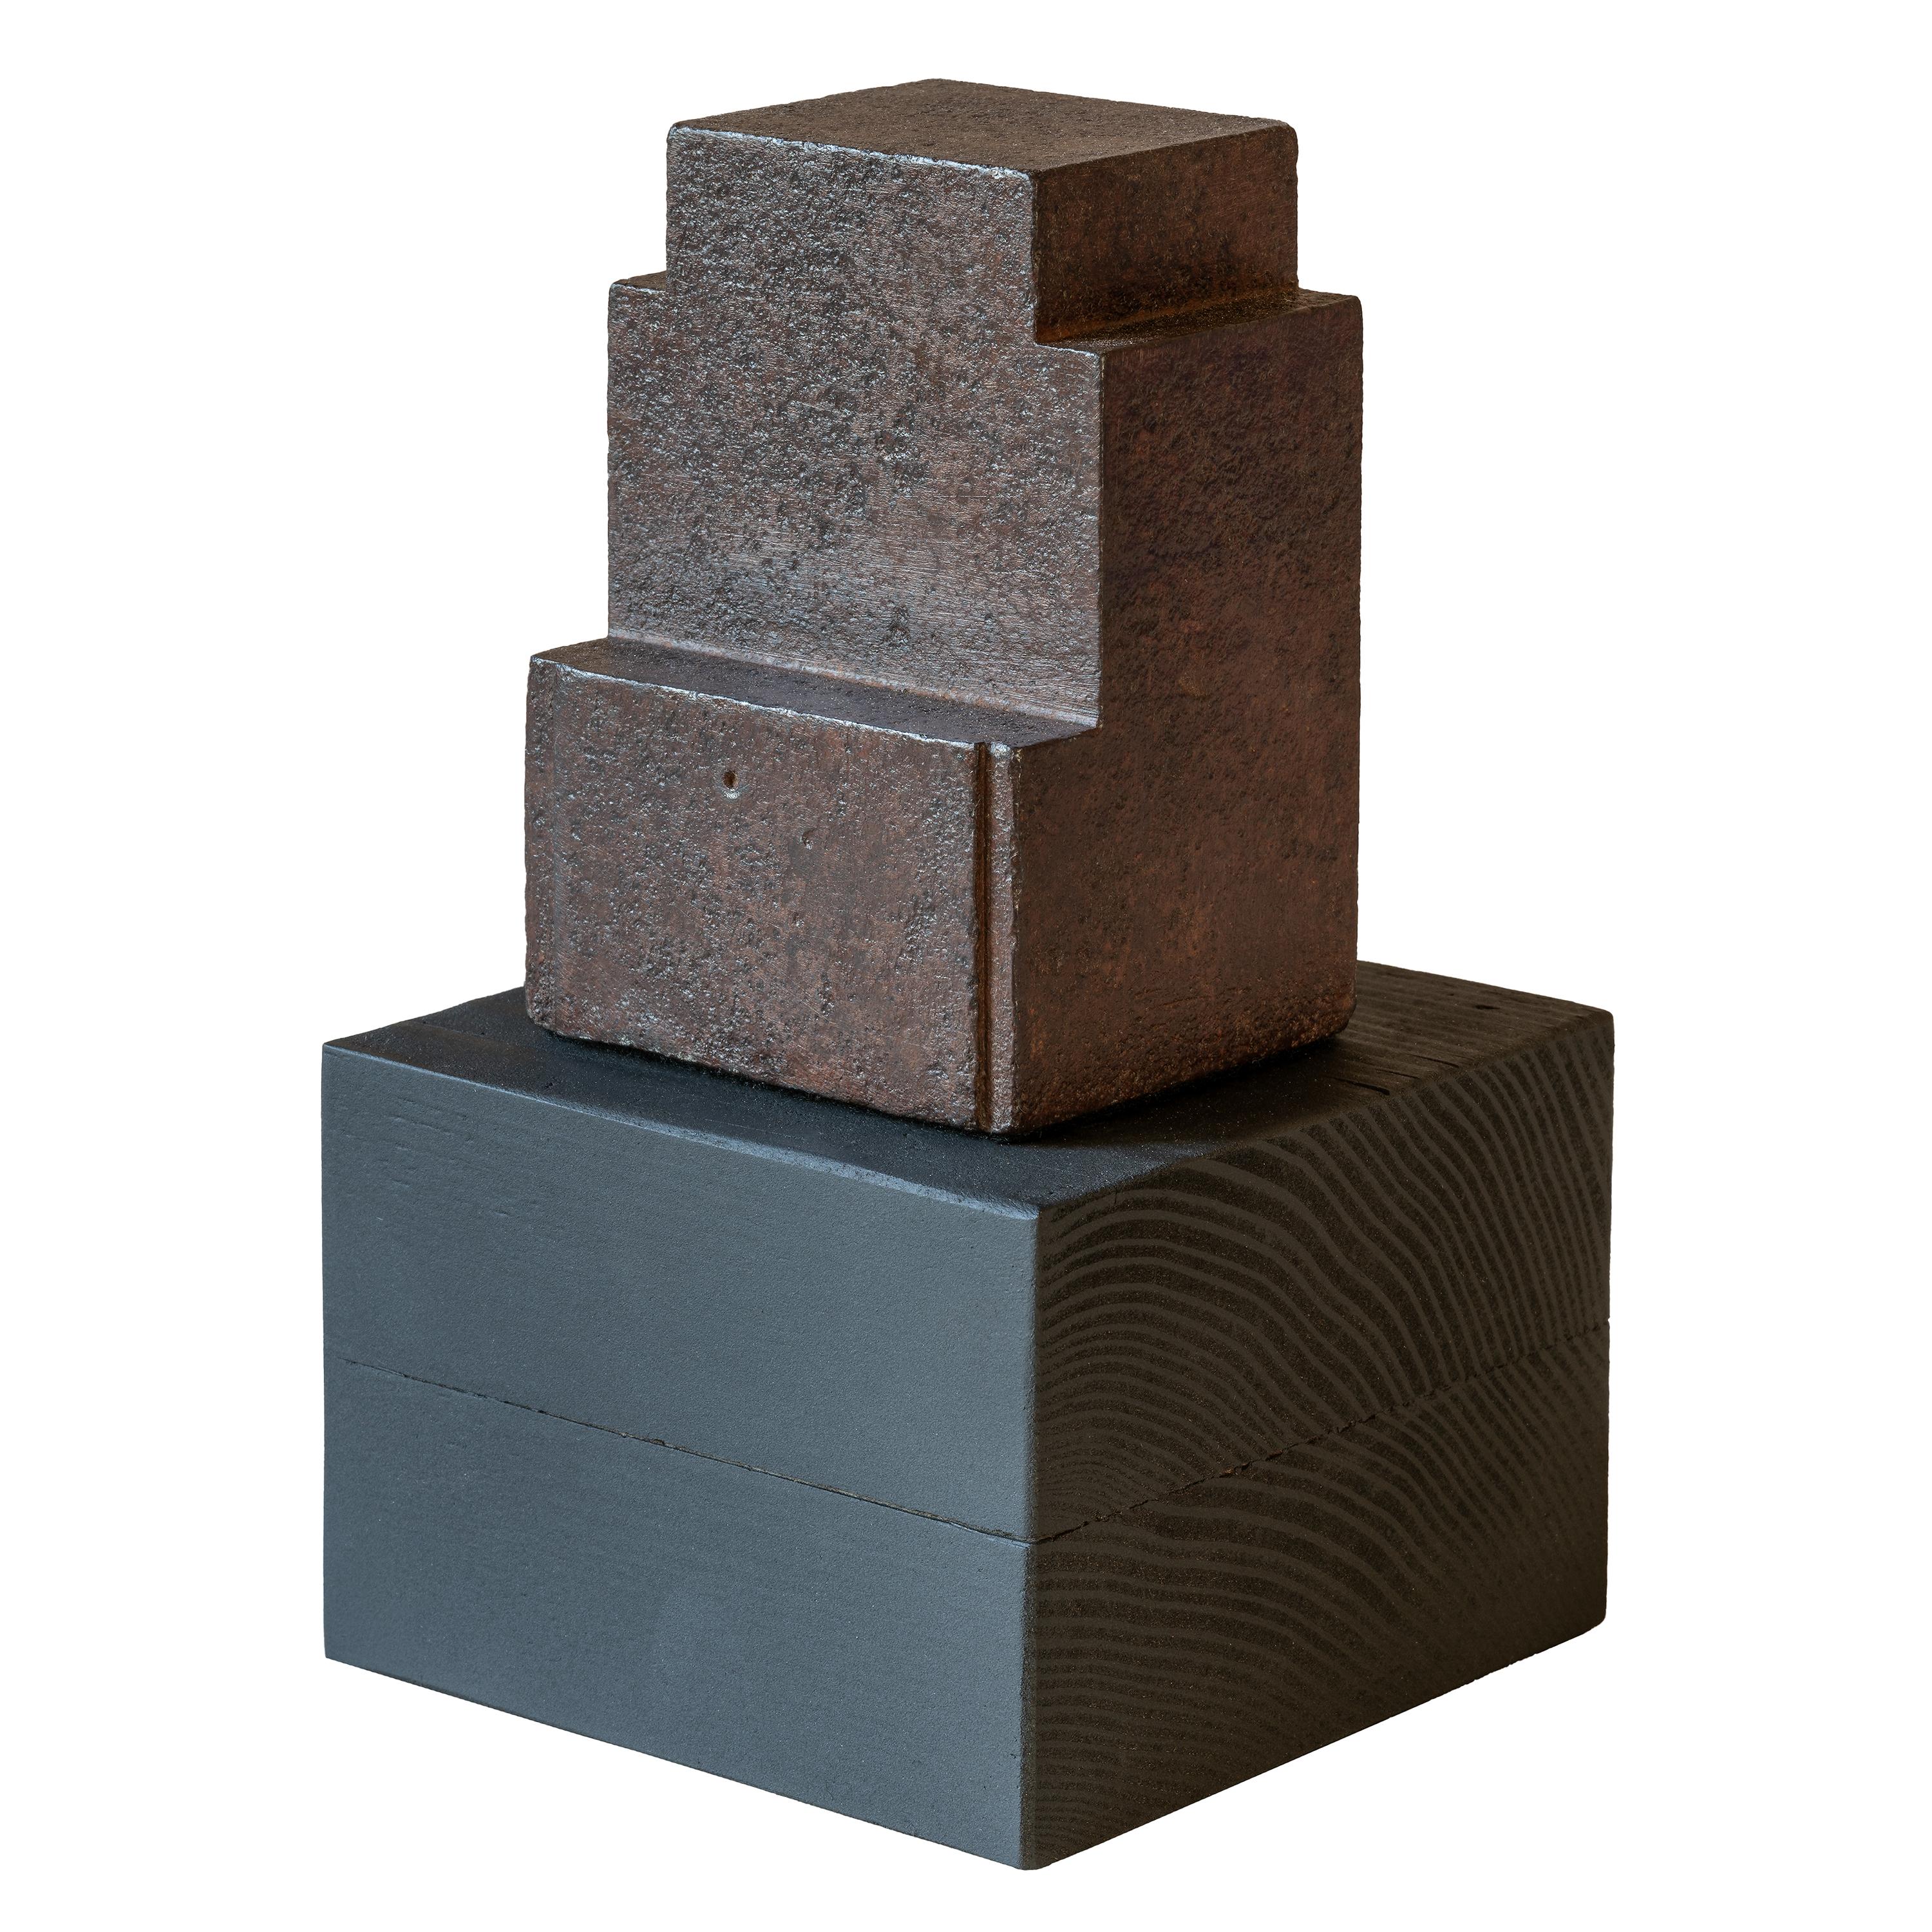 Minimalist Modern Structure, Rusted Steel on Wood Block Base For Sale